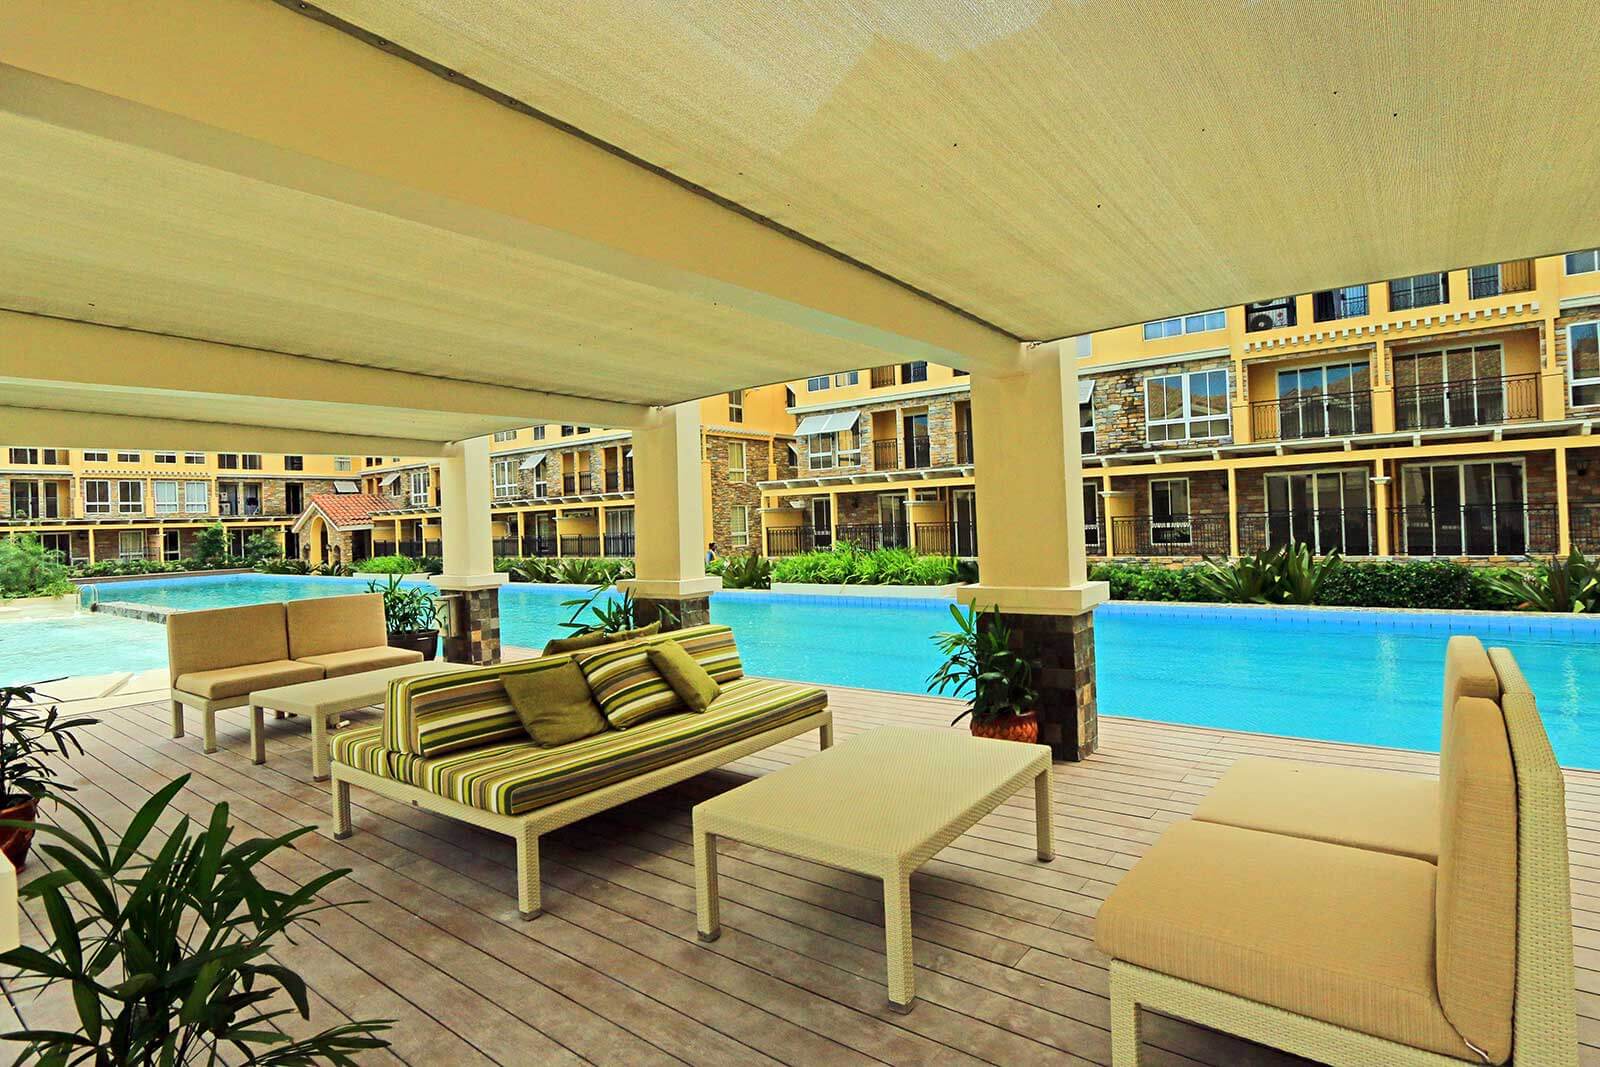 Pool deck in Amalfi. (Photo: Filinvest)